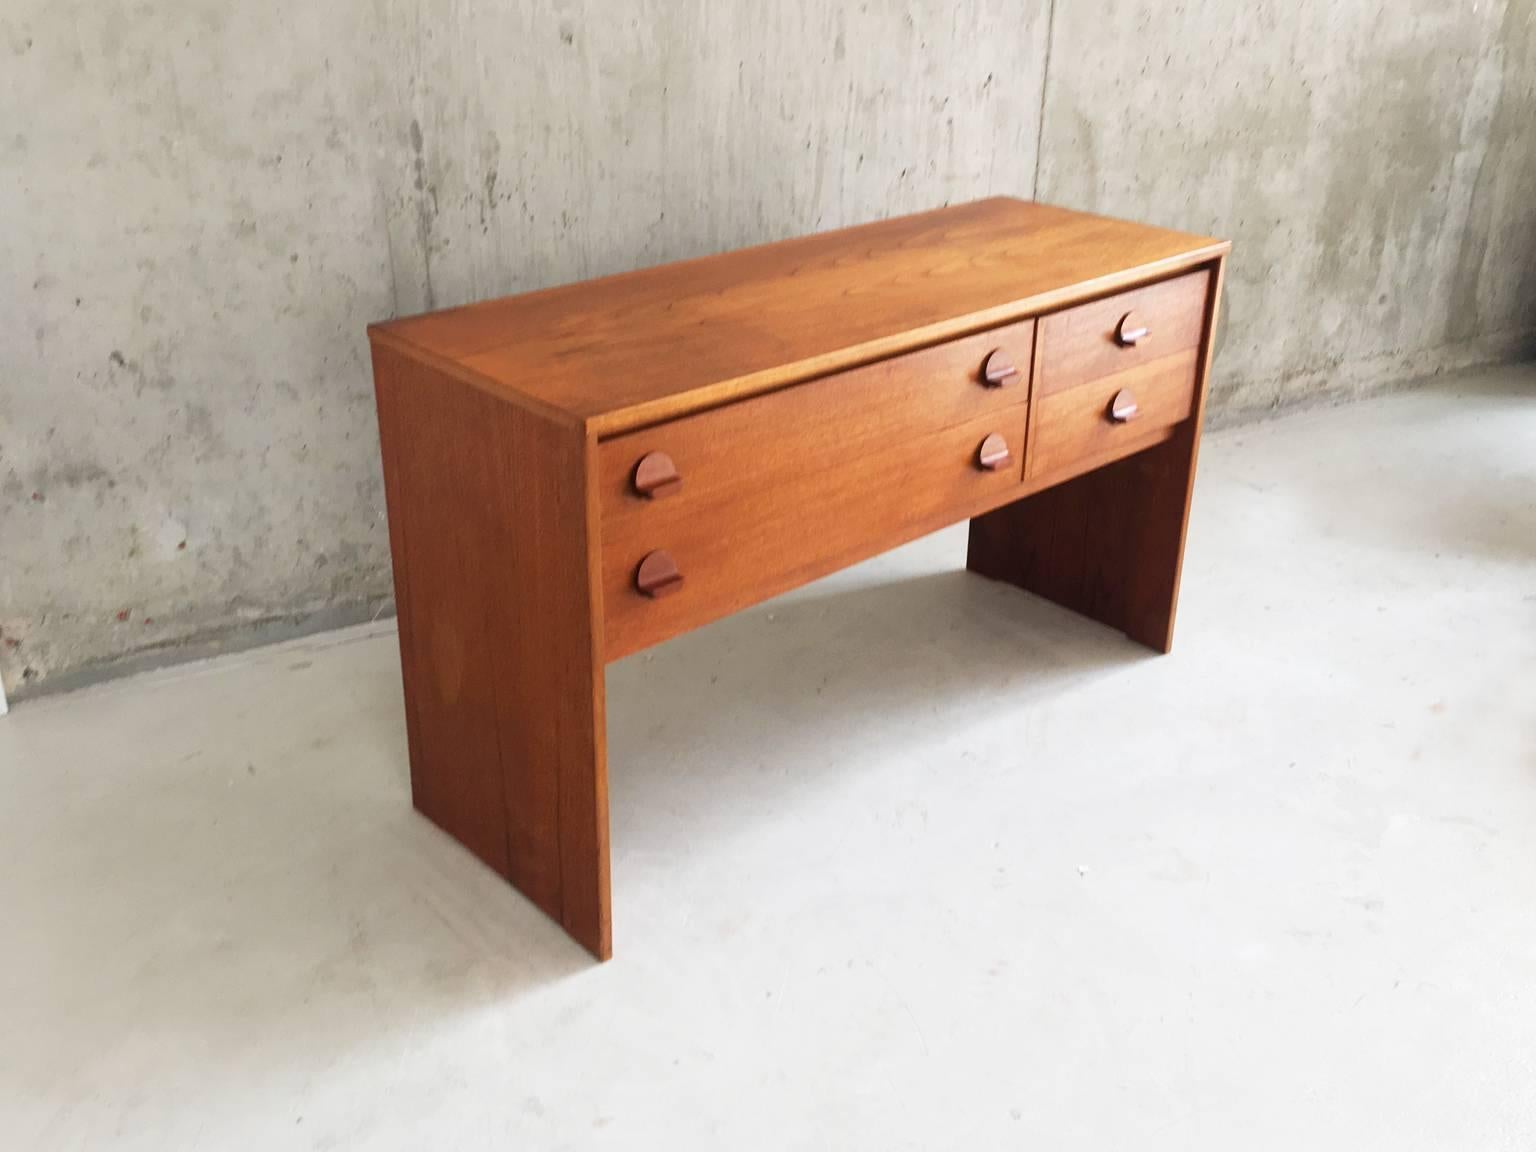 Stag Furniture was a mass market British manufacturer that made some outstanding modern designs in the 1960s and 1970s. They employed John and Sylvia Reid as design consultants. This chest of drawers is from the Cantata range they designed and